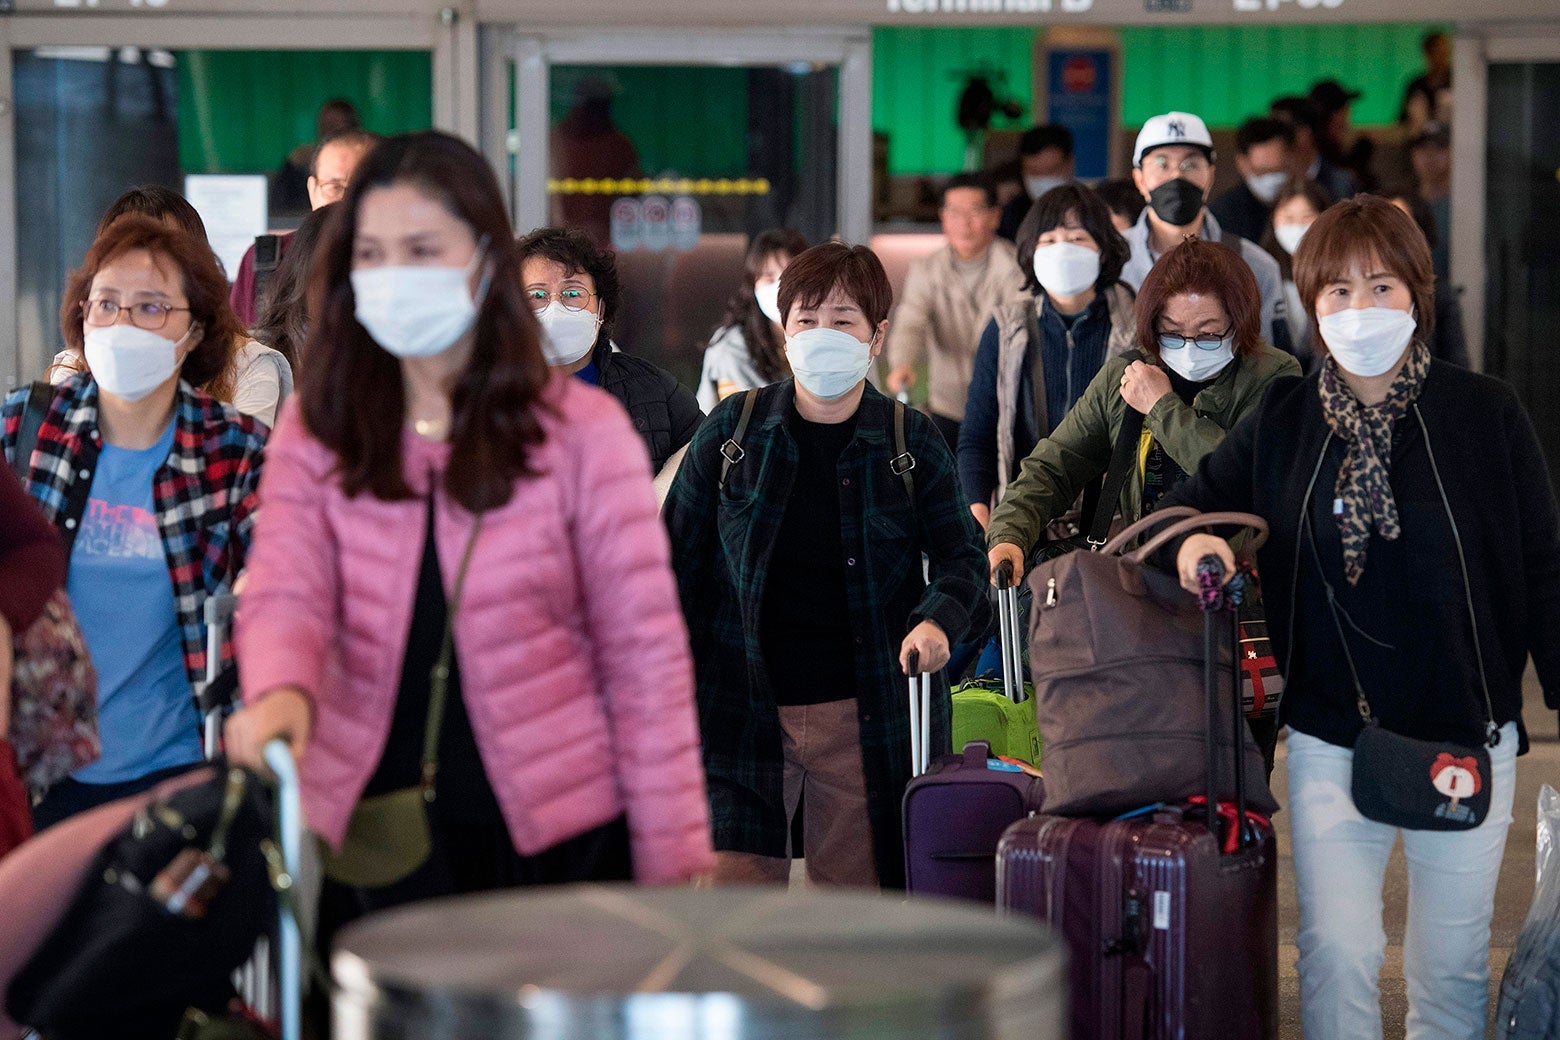 Airline passengers walk while carrying roller bags and wearing protective masks.